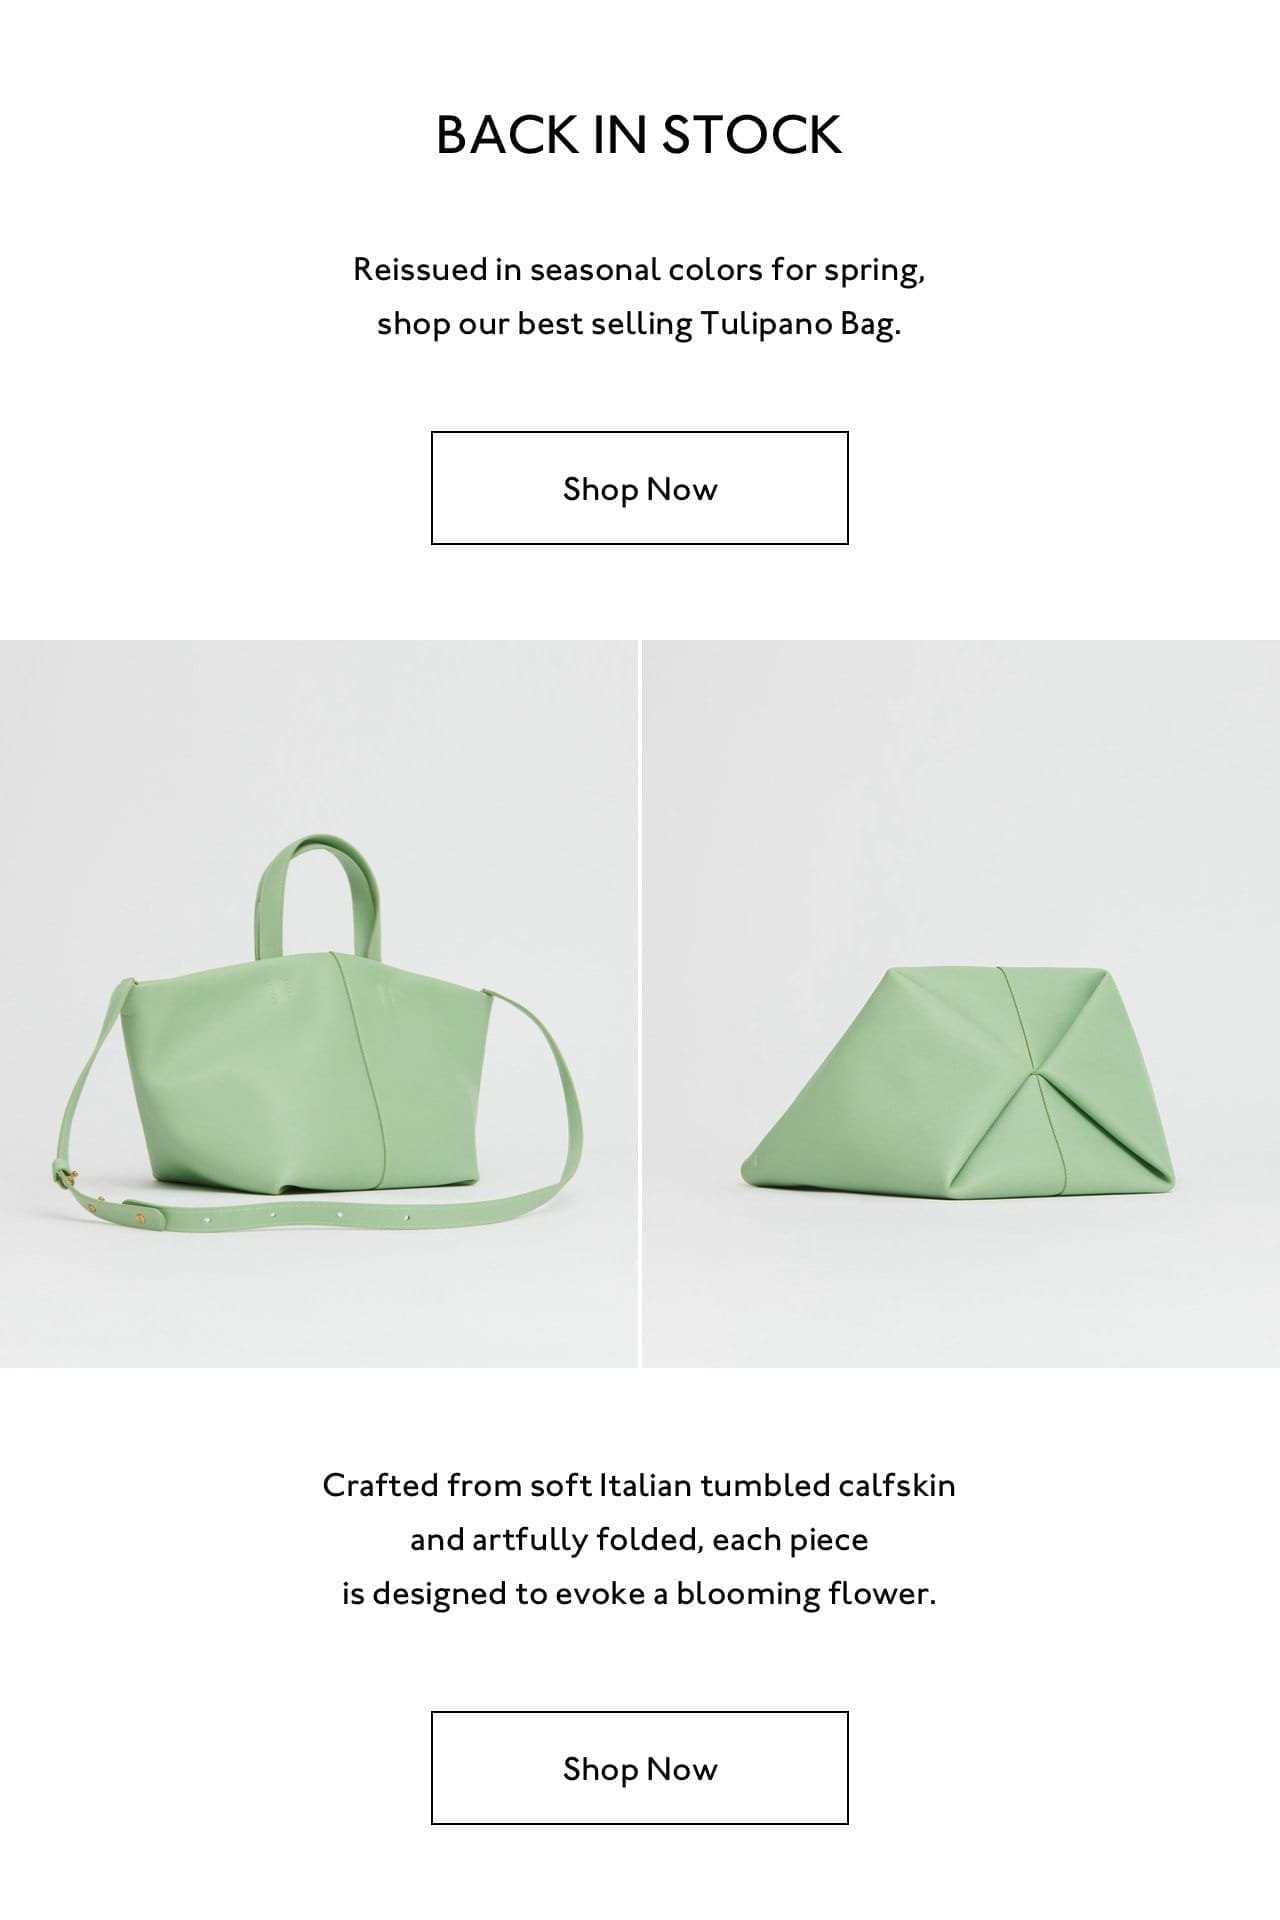 Reissued in seasonal colors for spring, shop our best selling Tulipano bag. Picutred: the Tulipano Bag in Seaglass. Shop now.